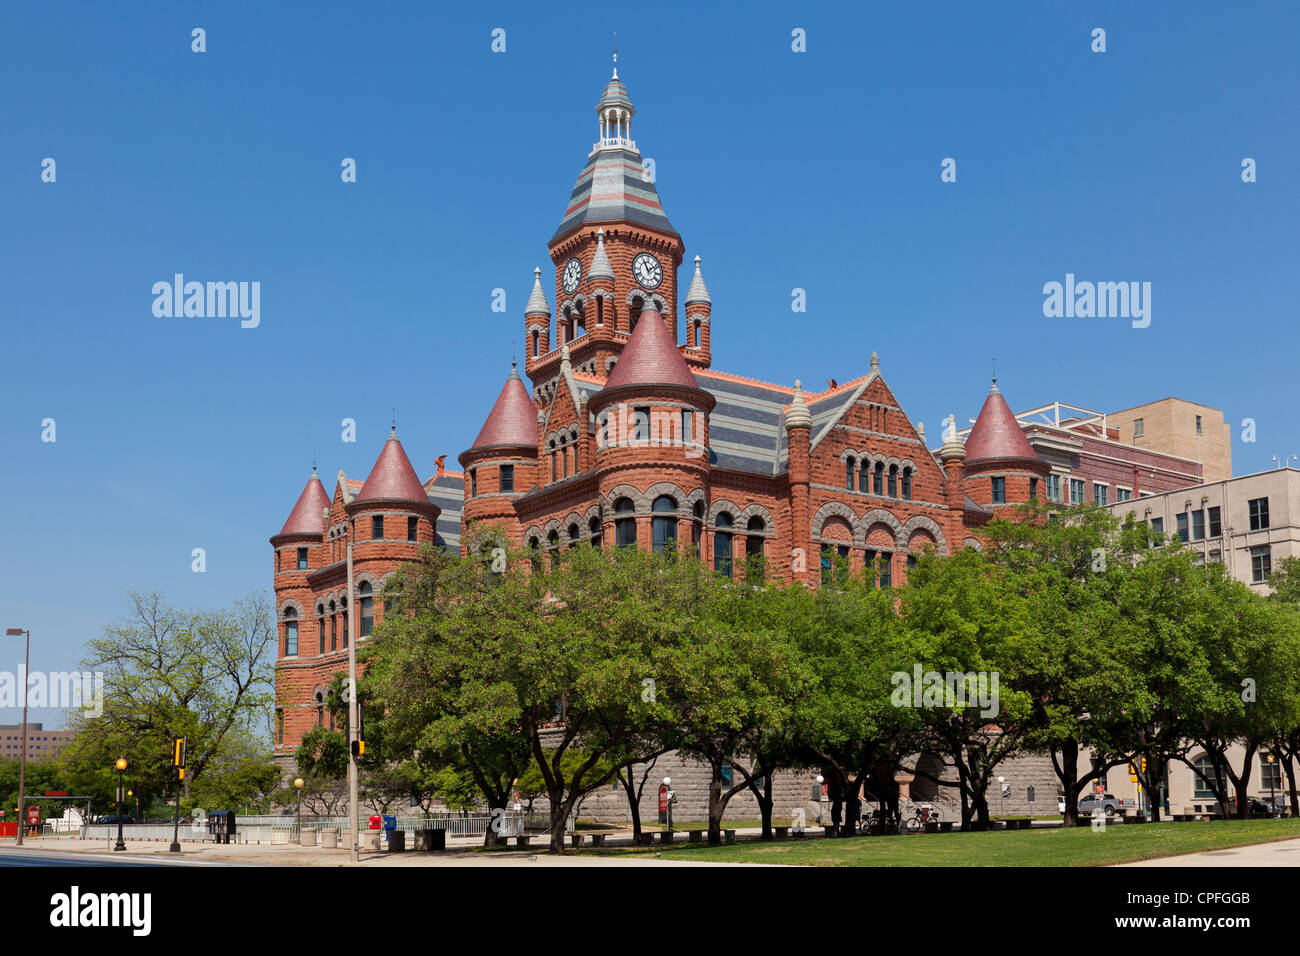 Old Red Courthouse. Dallas, Texas. Foto Stock